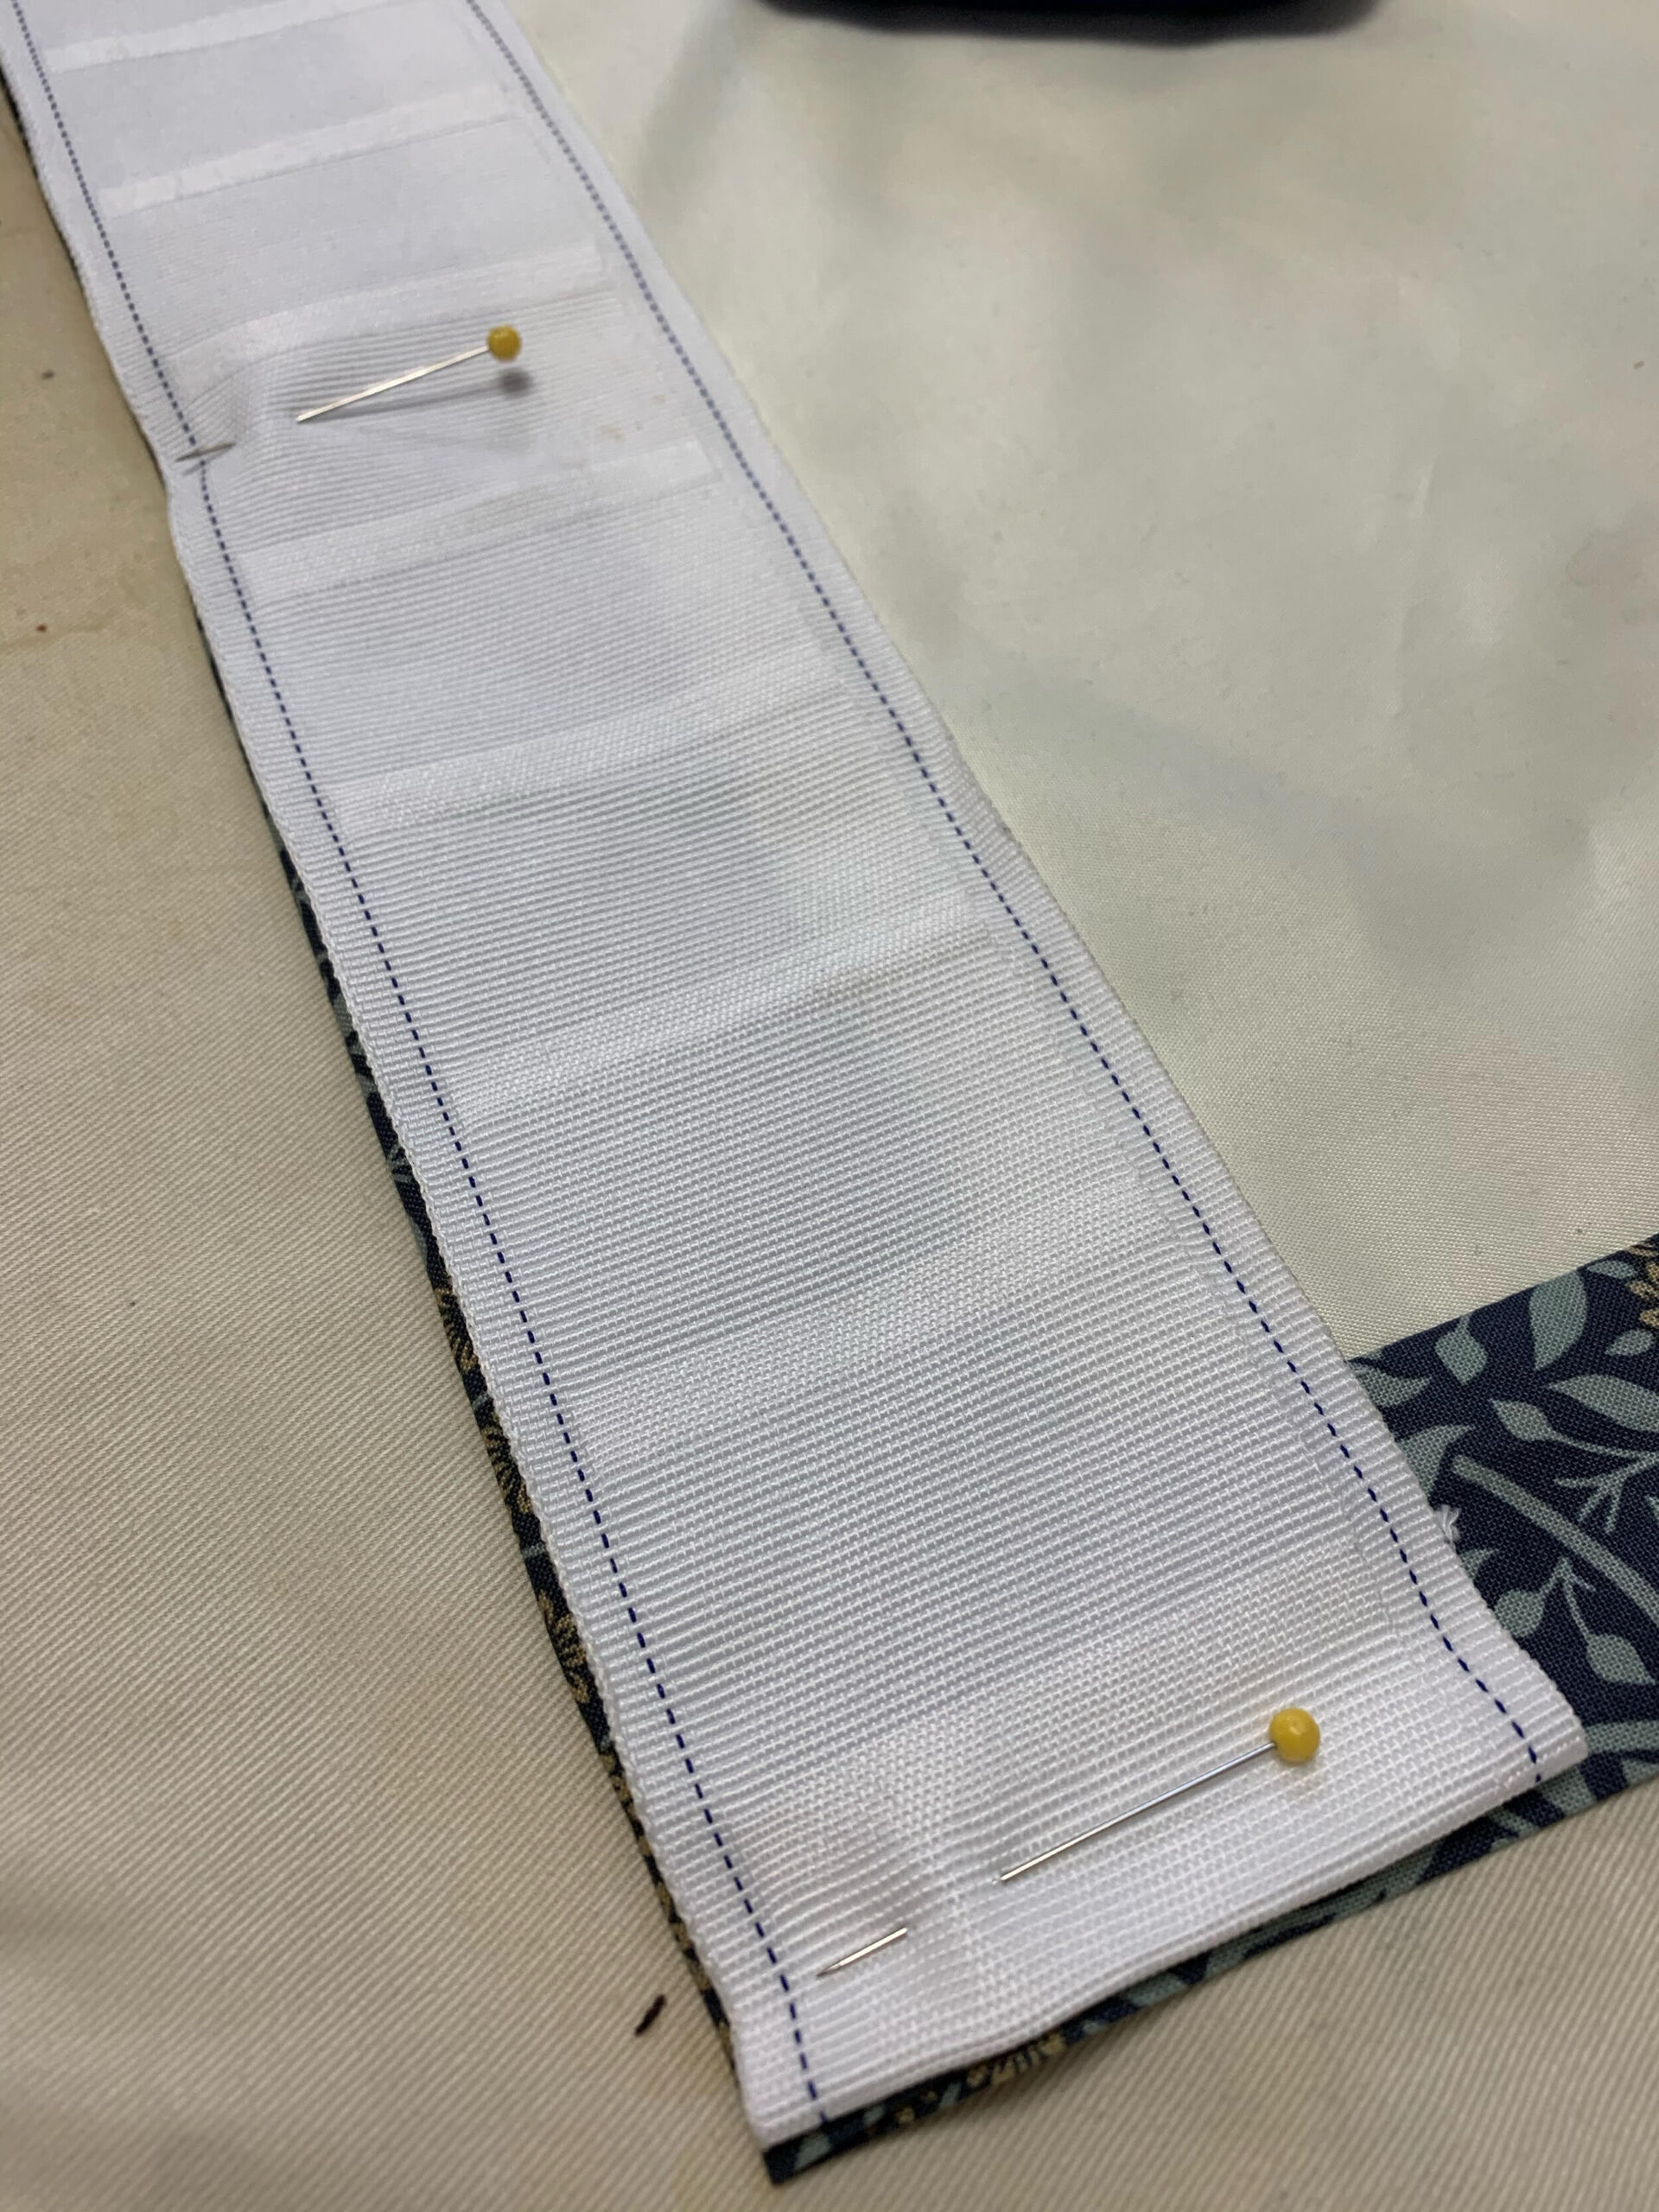 pleat tape pinned to the top of the curtain